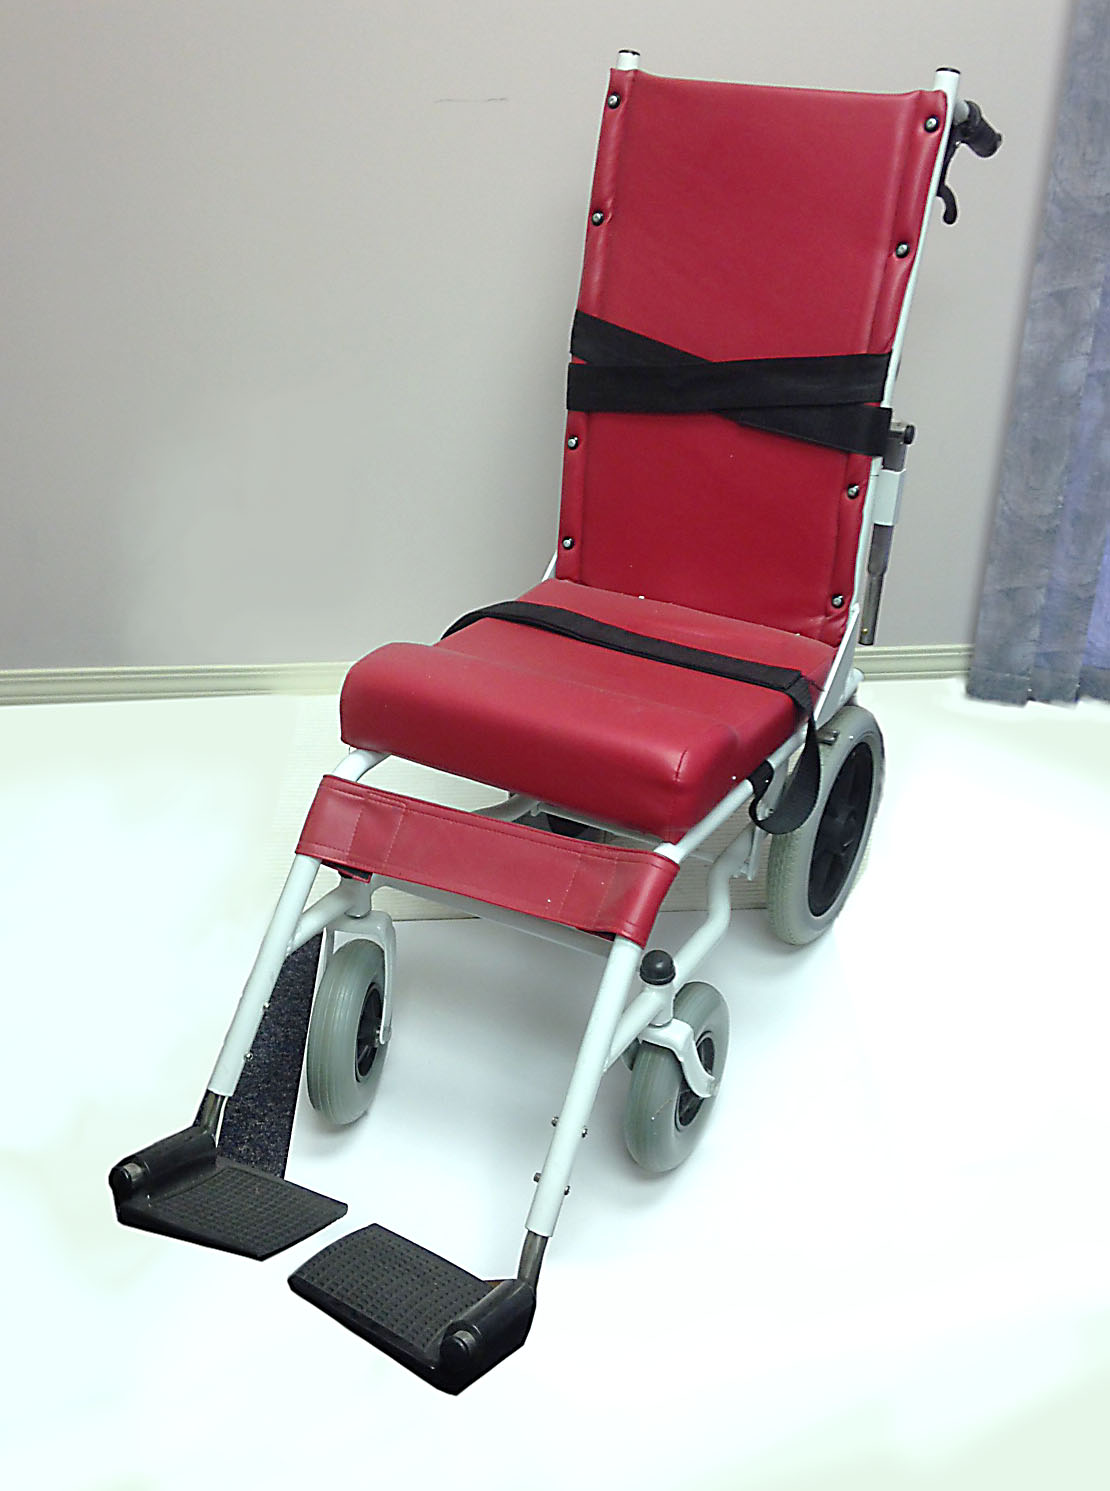 Used Units For Sale: Stairclimbers, Mobility Chairs - bkdaerospace.com